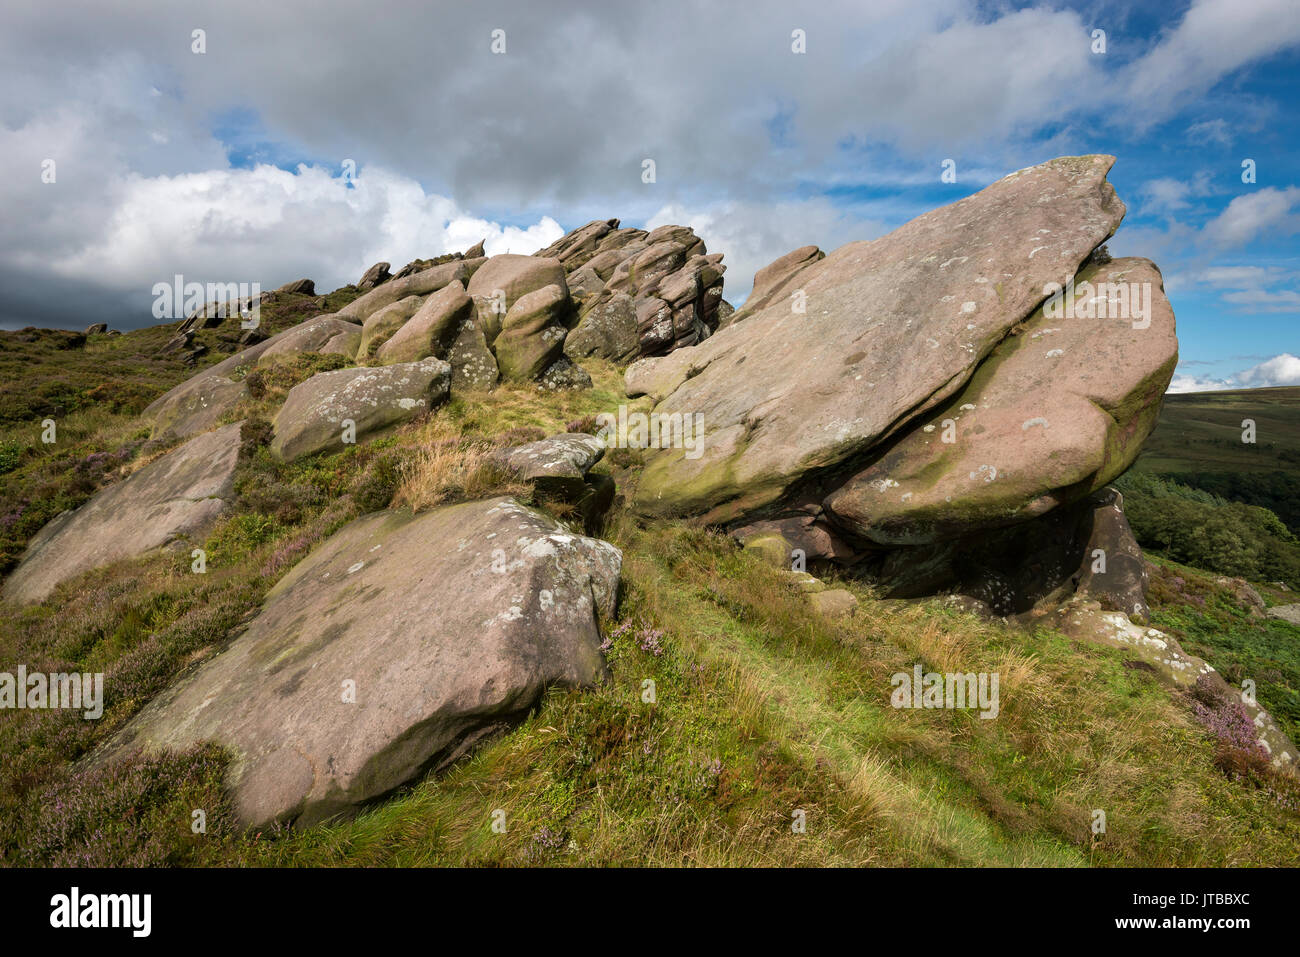 Dramatic scenery at Ramshaw rocks in the Peak District national park, Staffordshire, England. Stock Photo